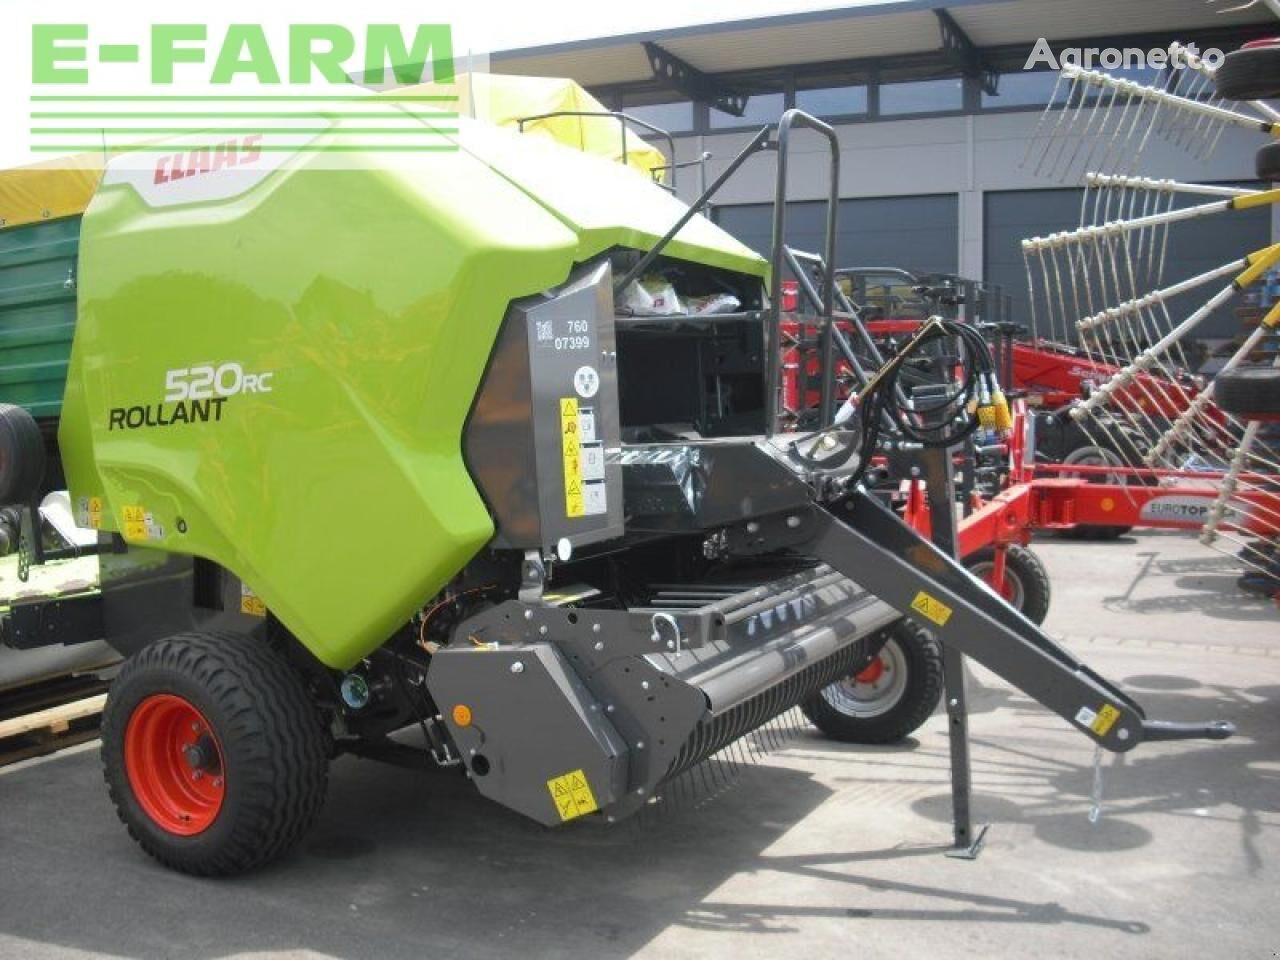 Claas rollant 520 rc square baler